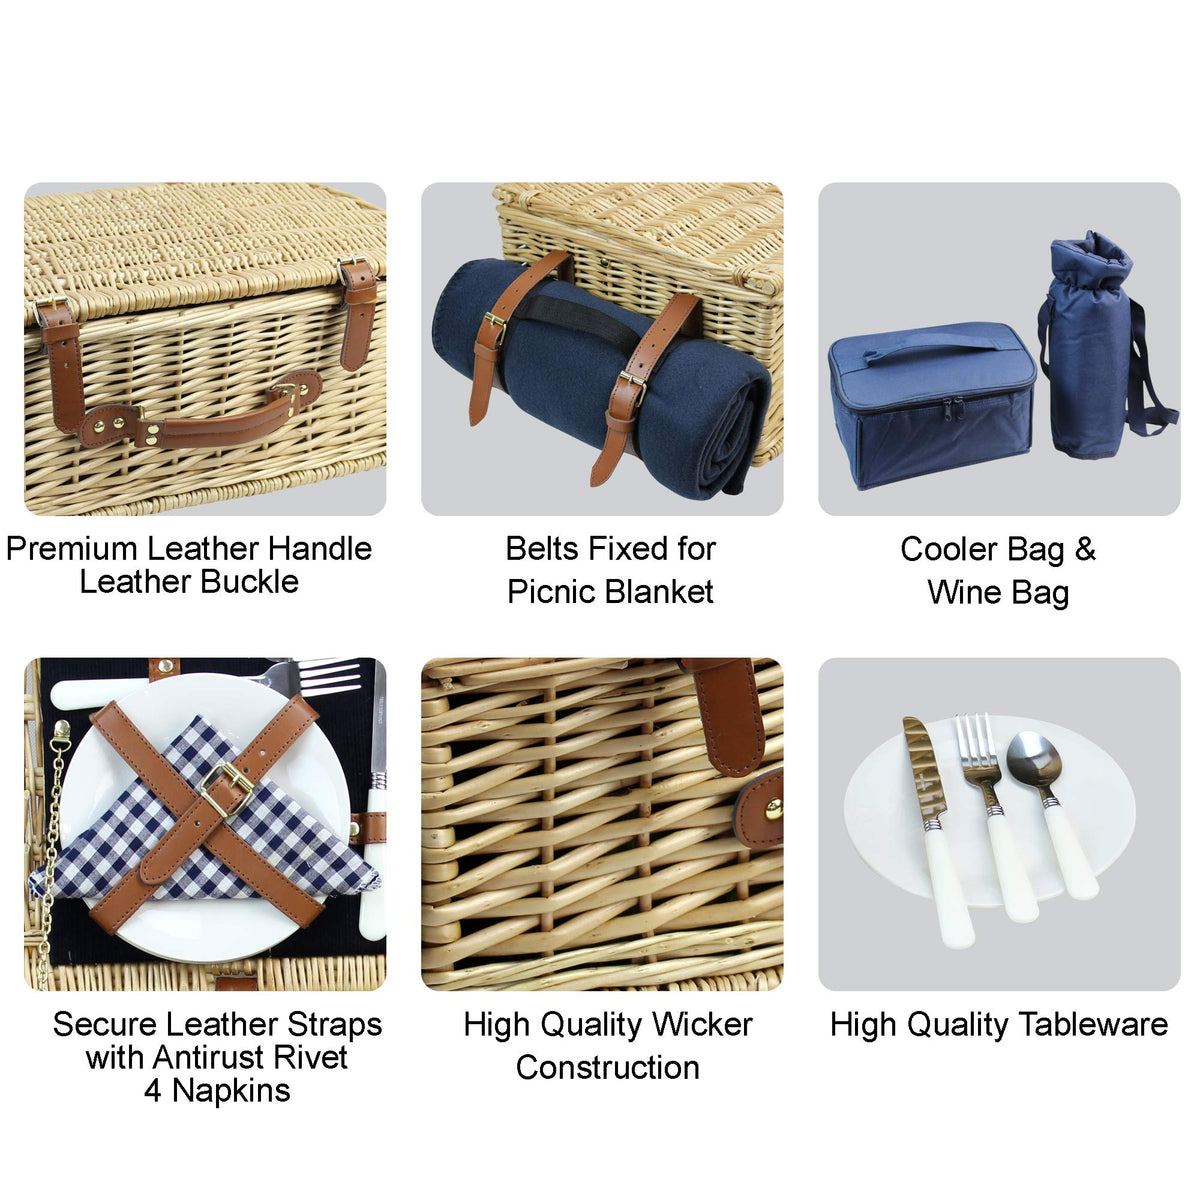 Happypicnic® Deluxe Willow Picnic Basket Set for 4